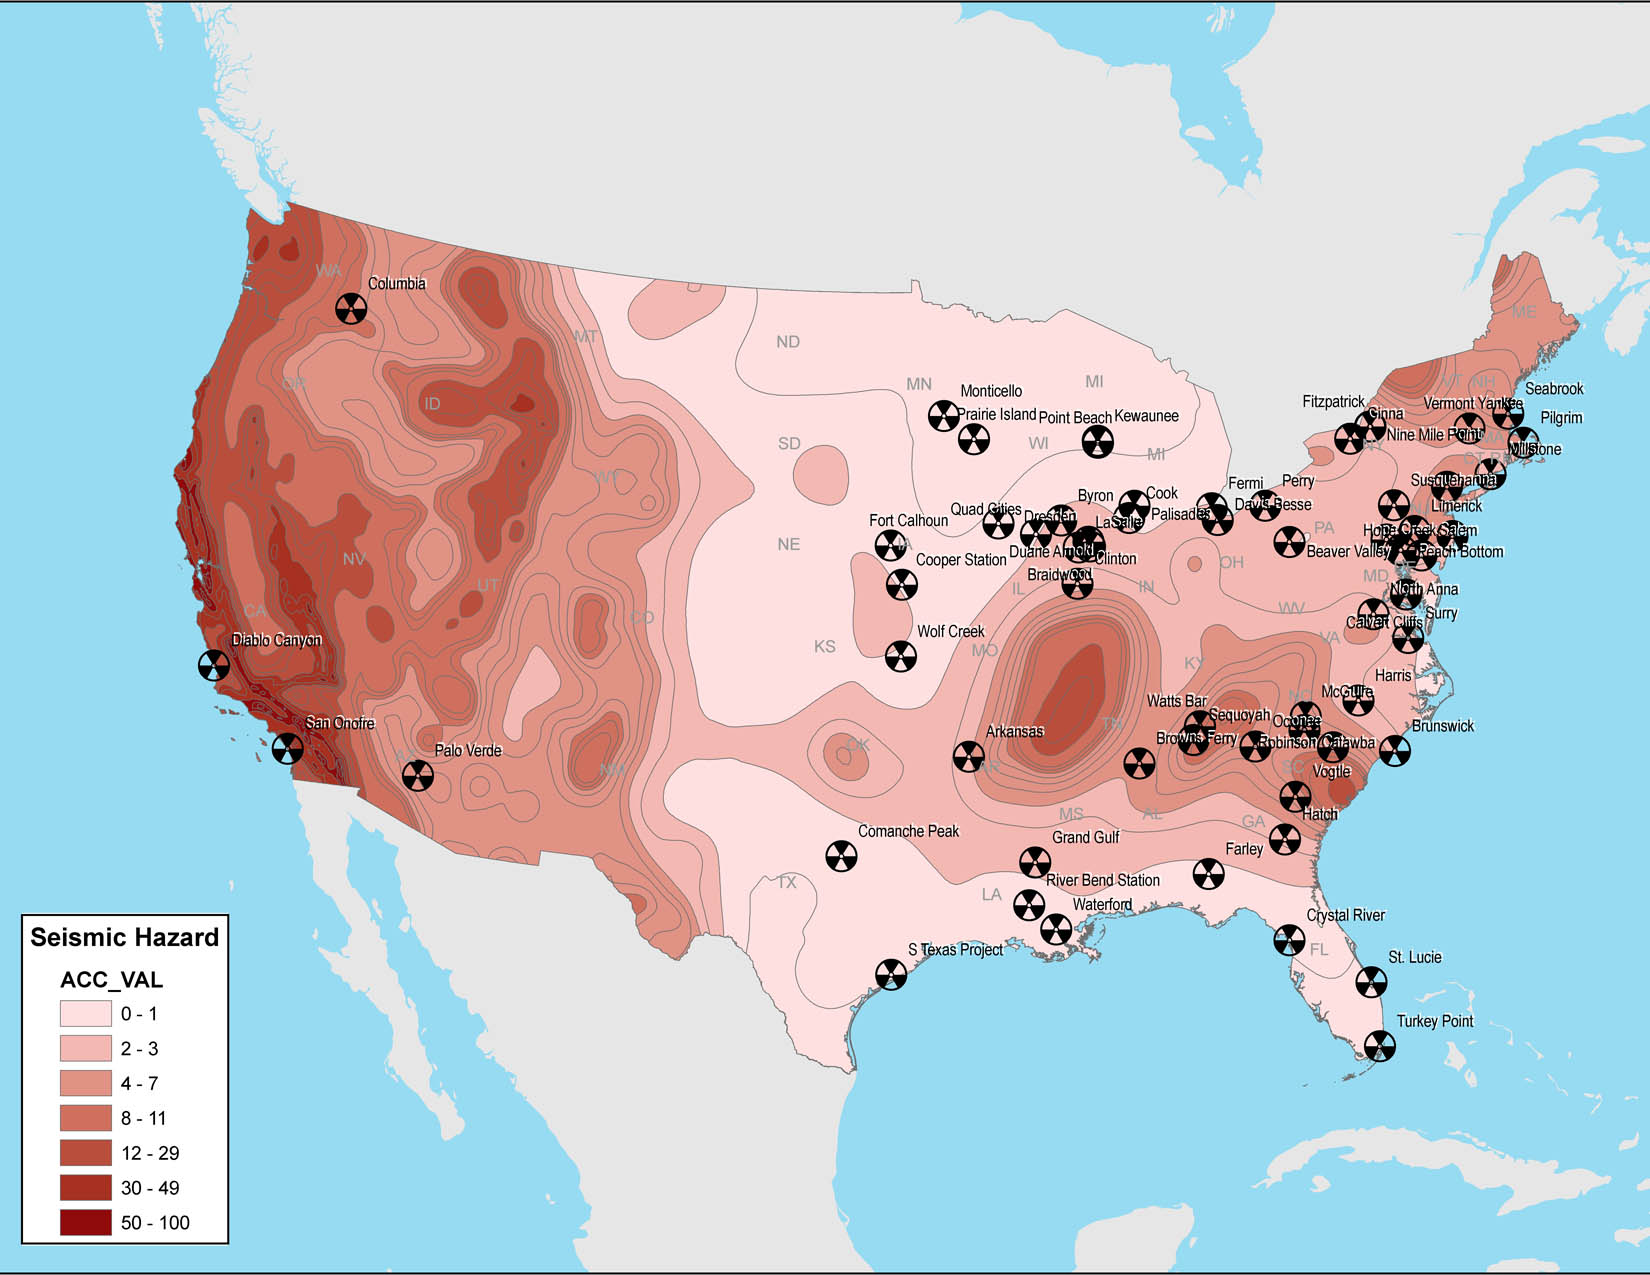 New maps of nuclear power plants and seismic hazards in the United States 